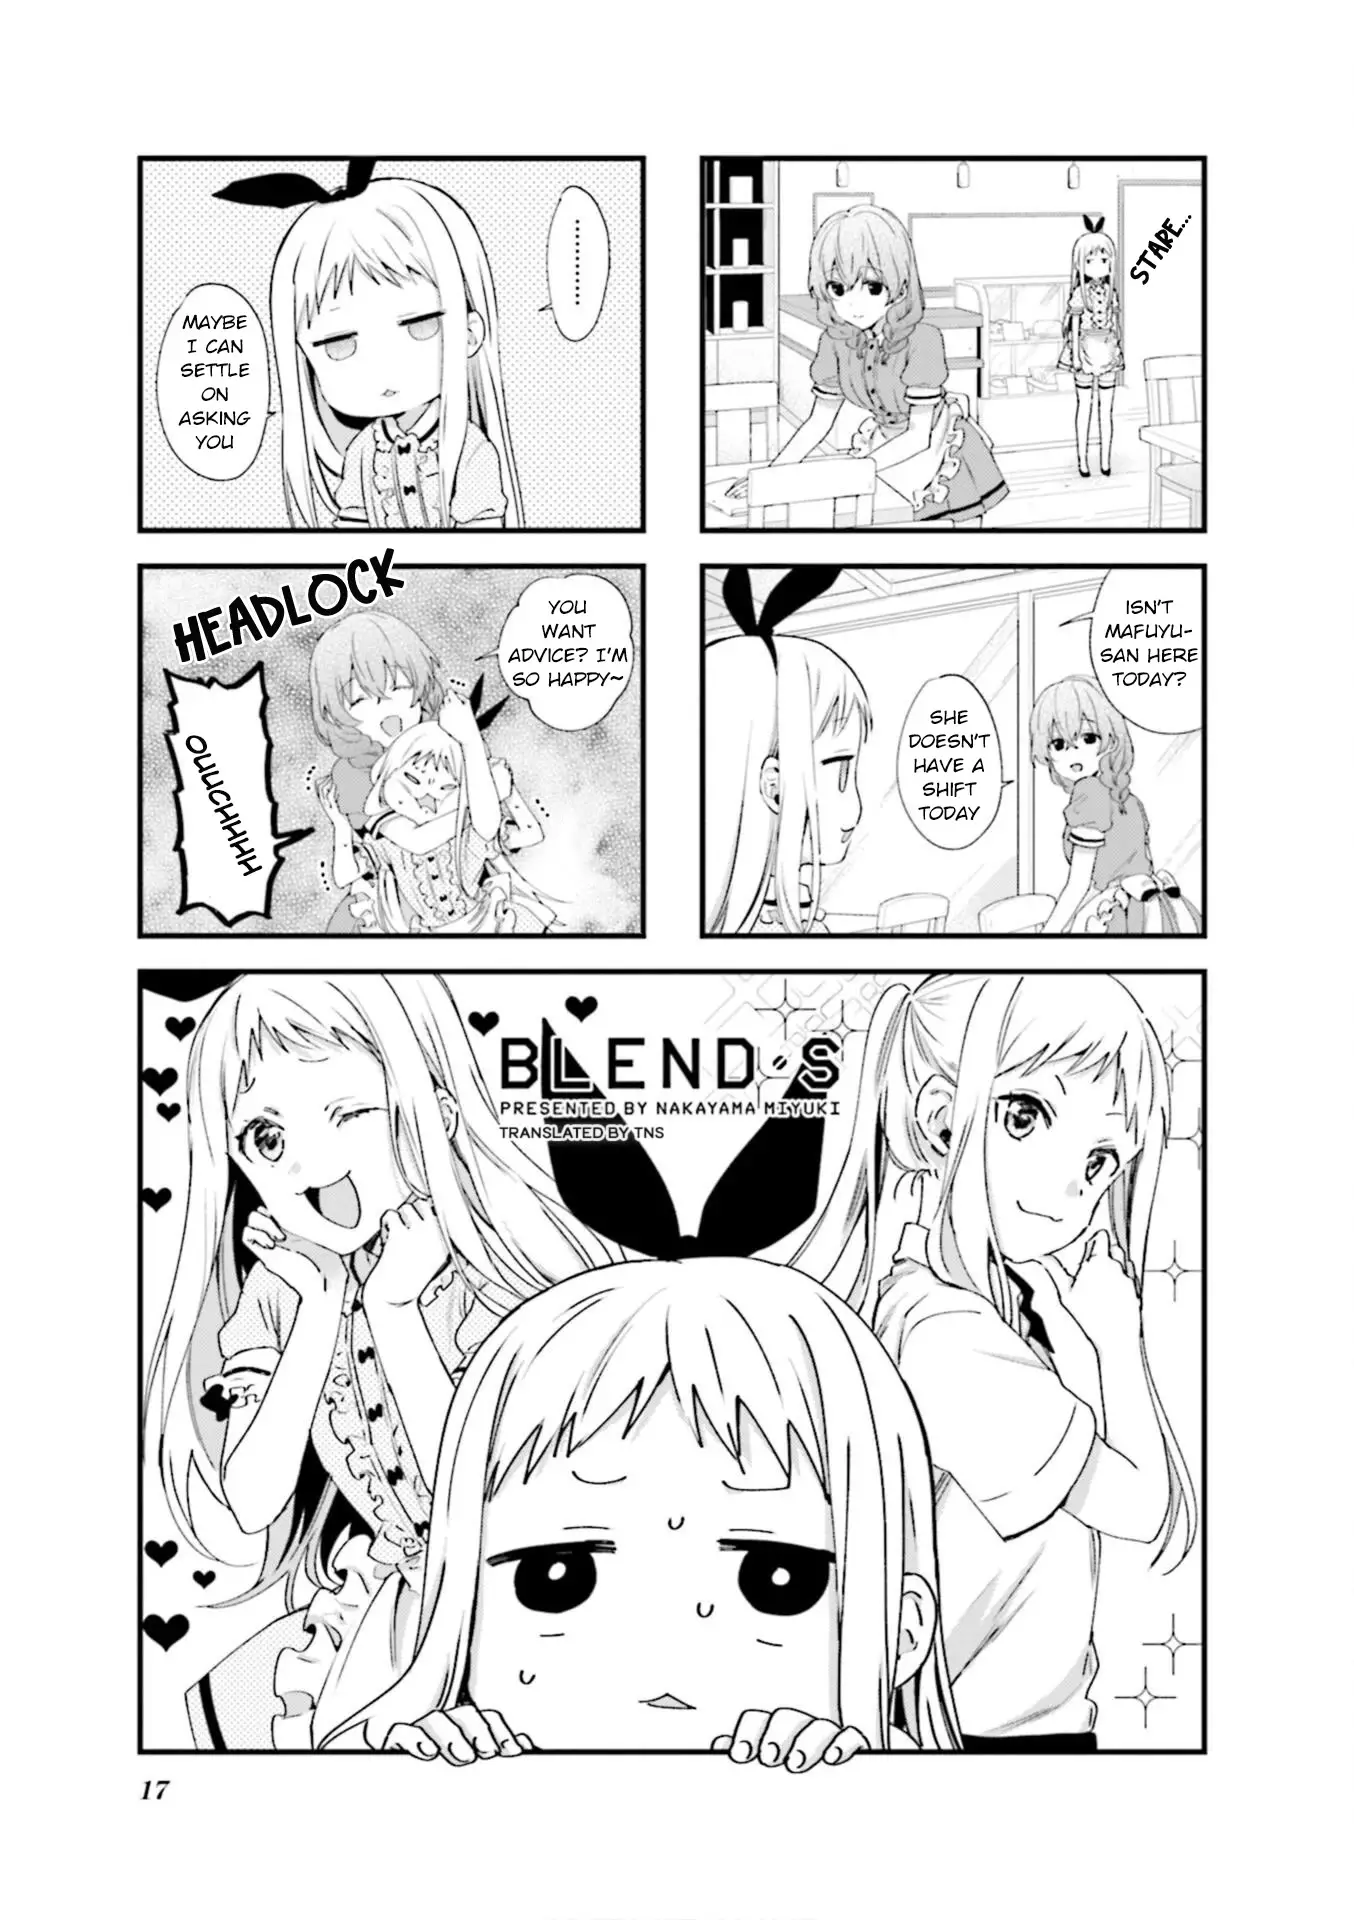 Blend S - 88 page 1-b4317047